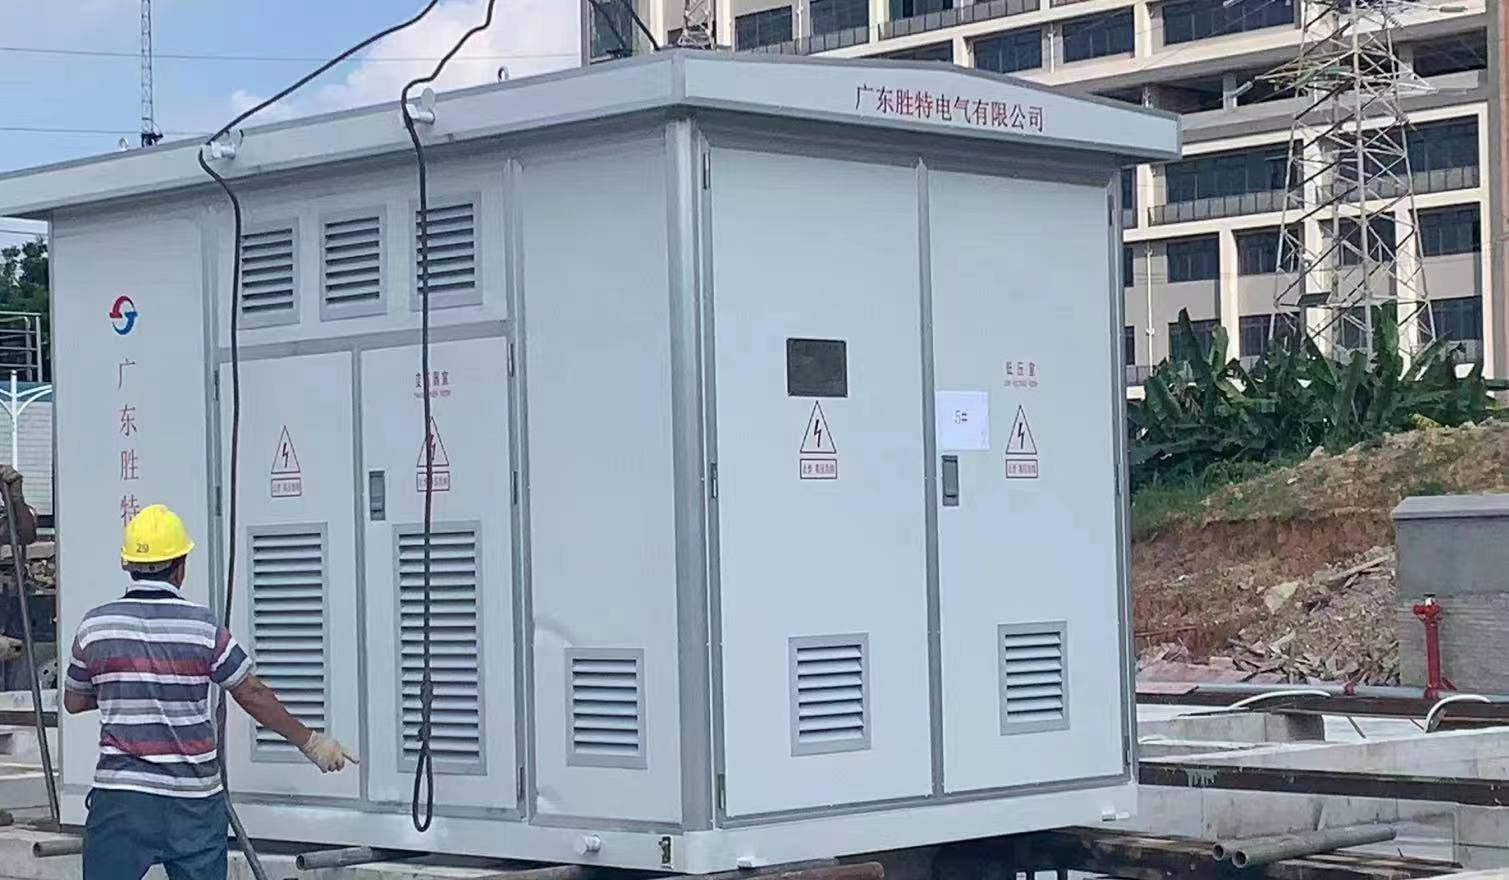 Outdoor Power Distribution Project in Bangkok, Thailand